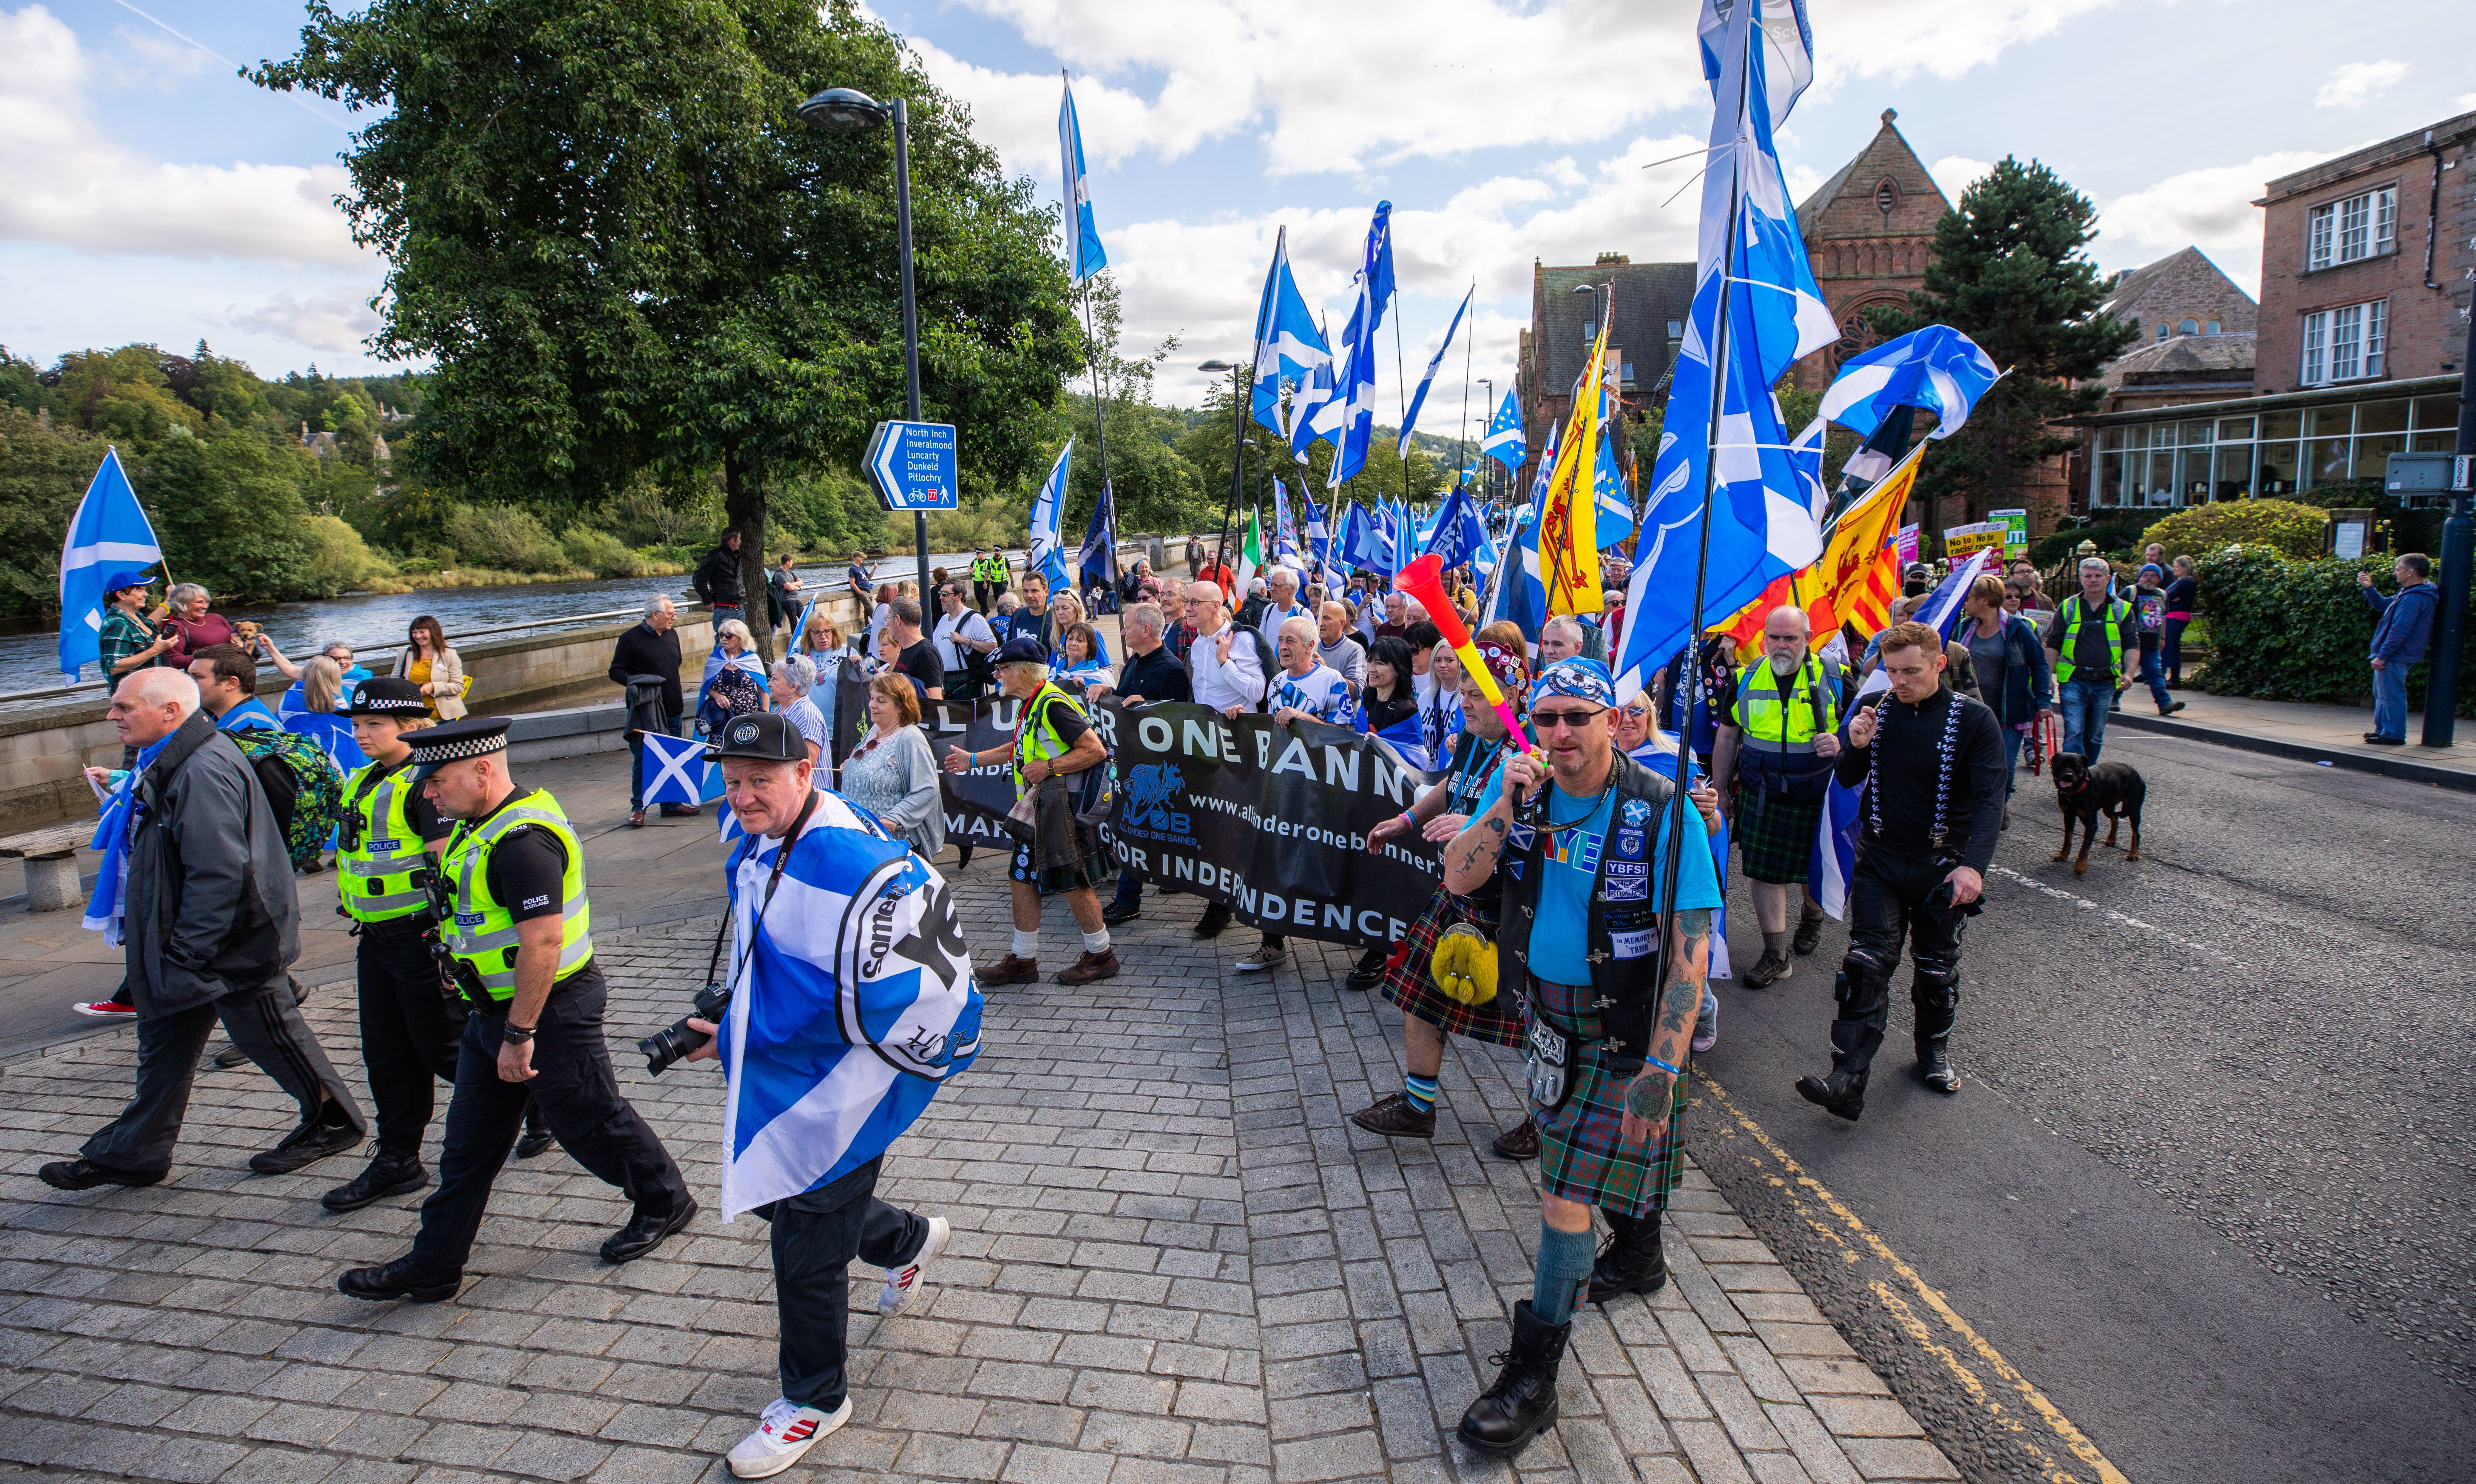 The All Under One Banner march on Tay Street.